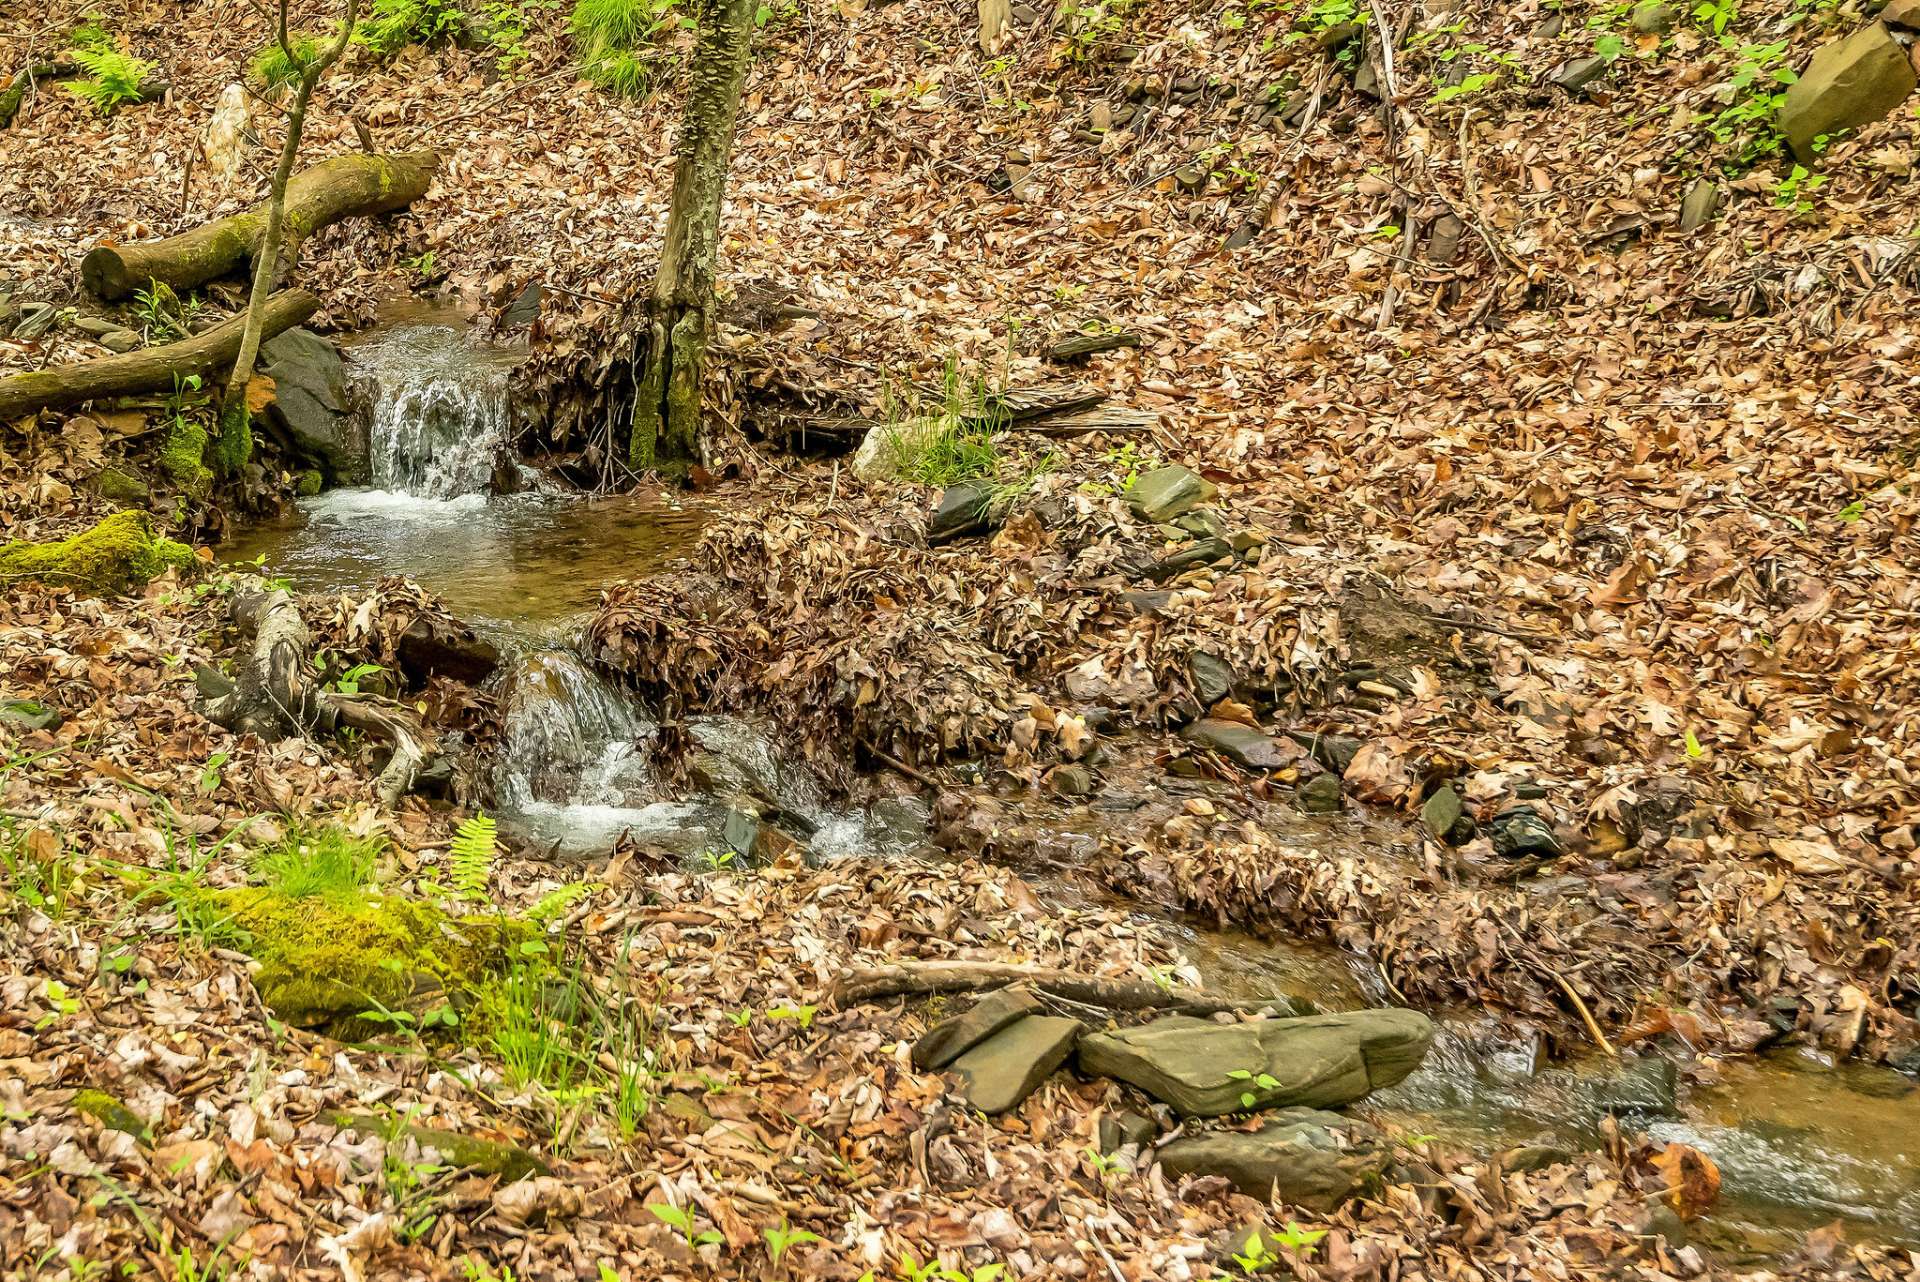 Spend the warm summer days treasure hunting in the cool crisp creek.